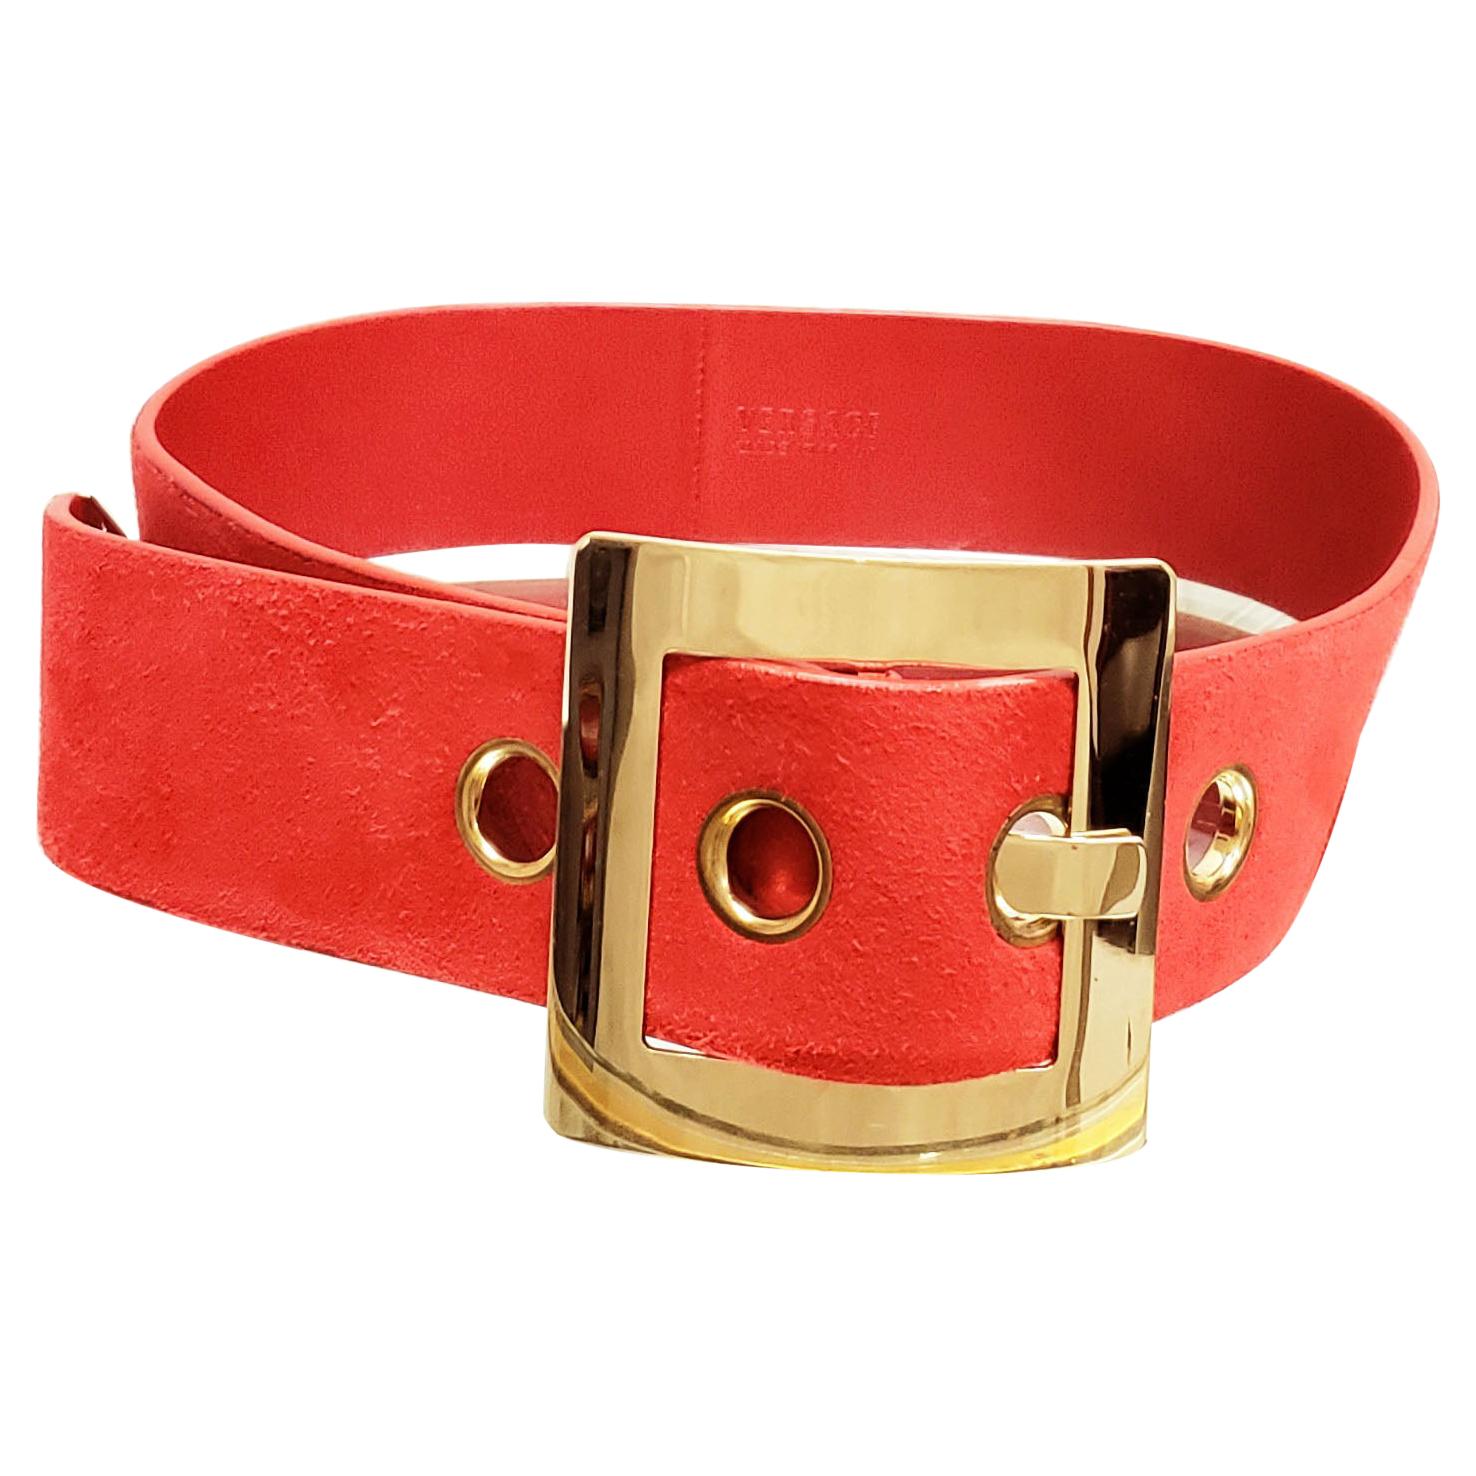 What are belts with bags called?